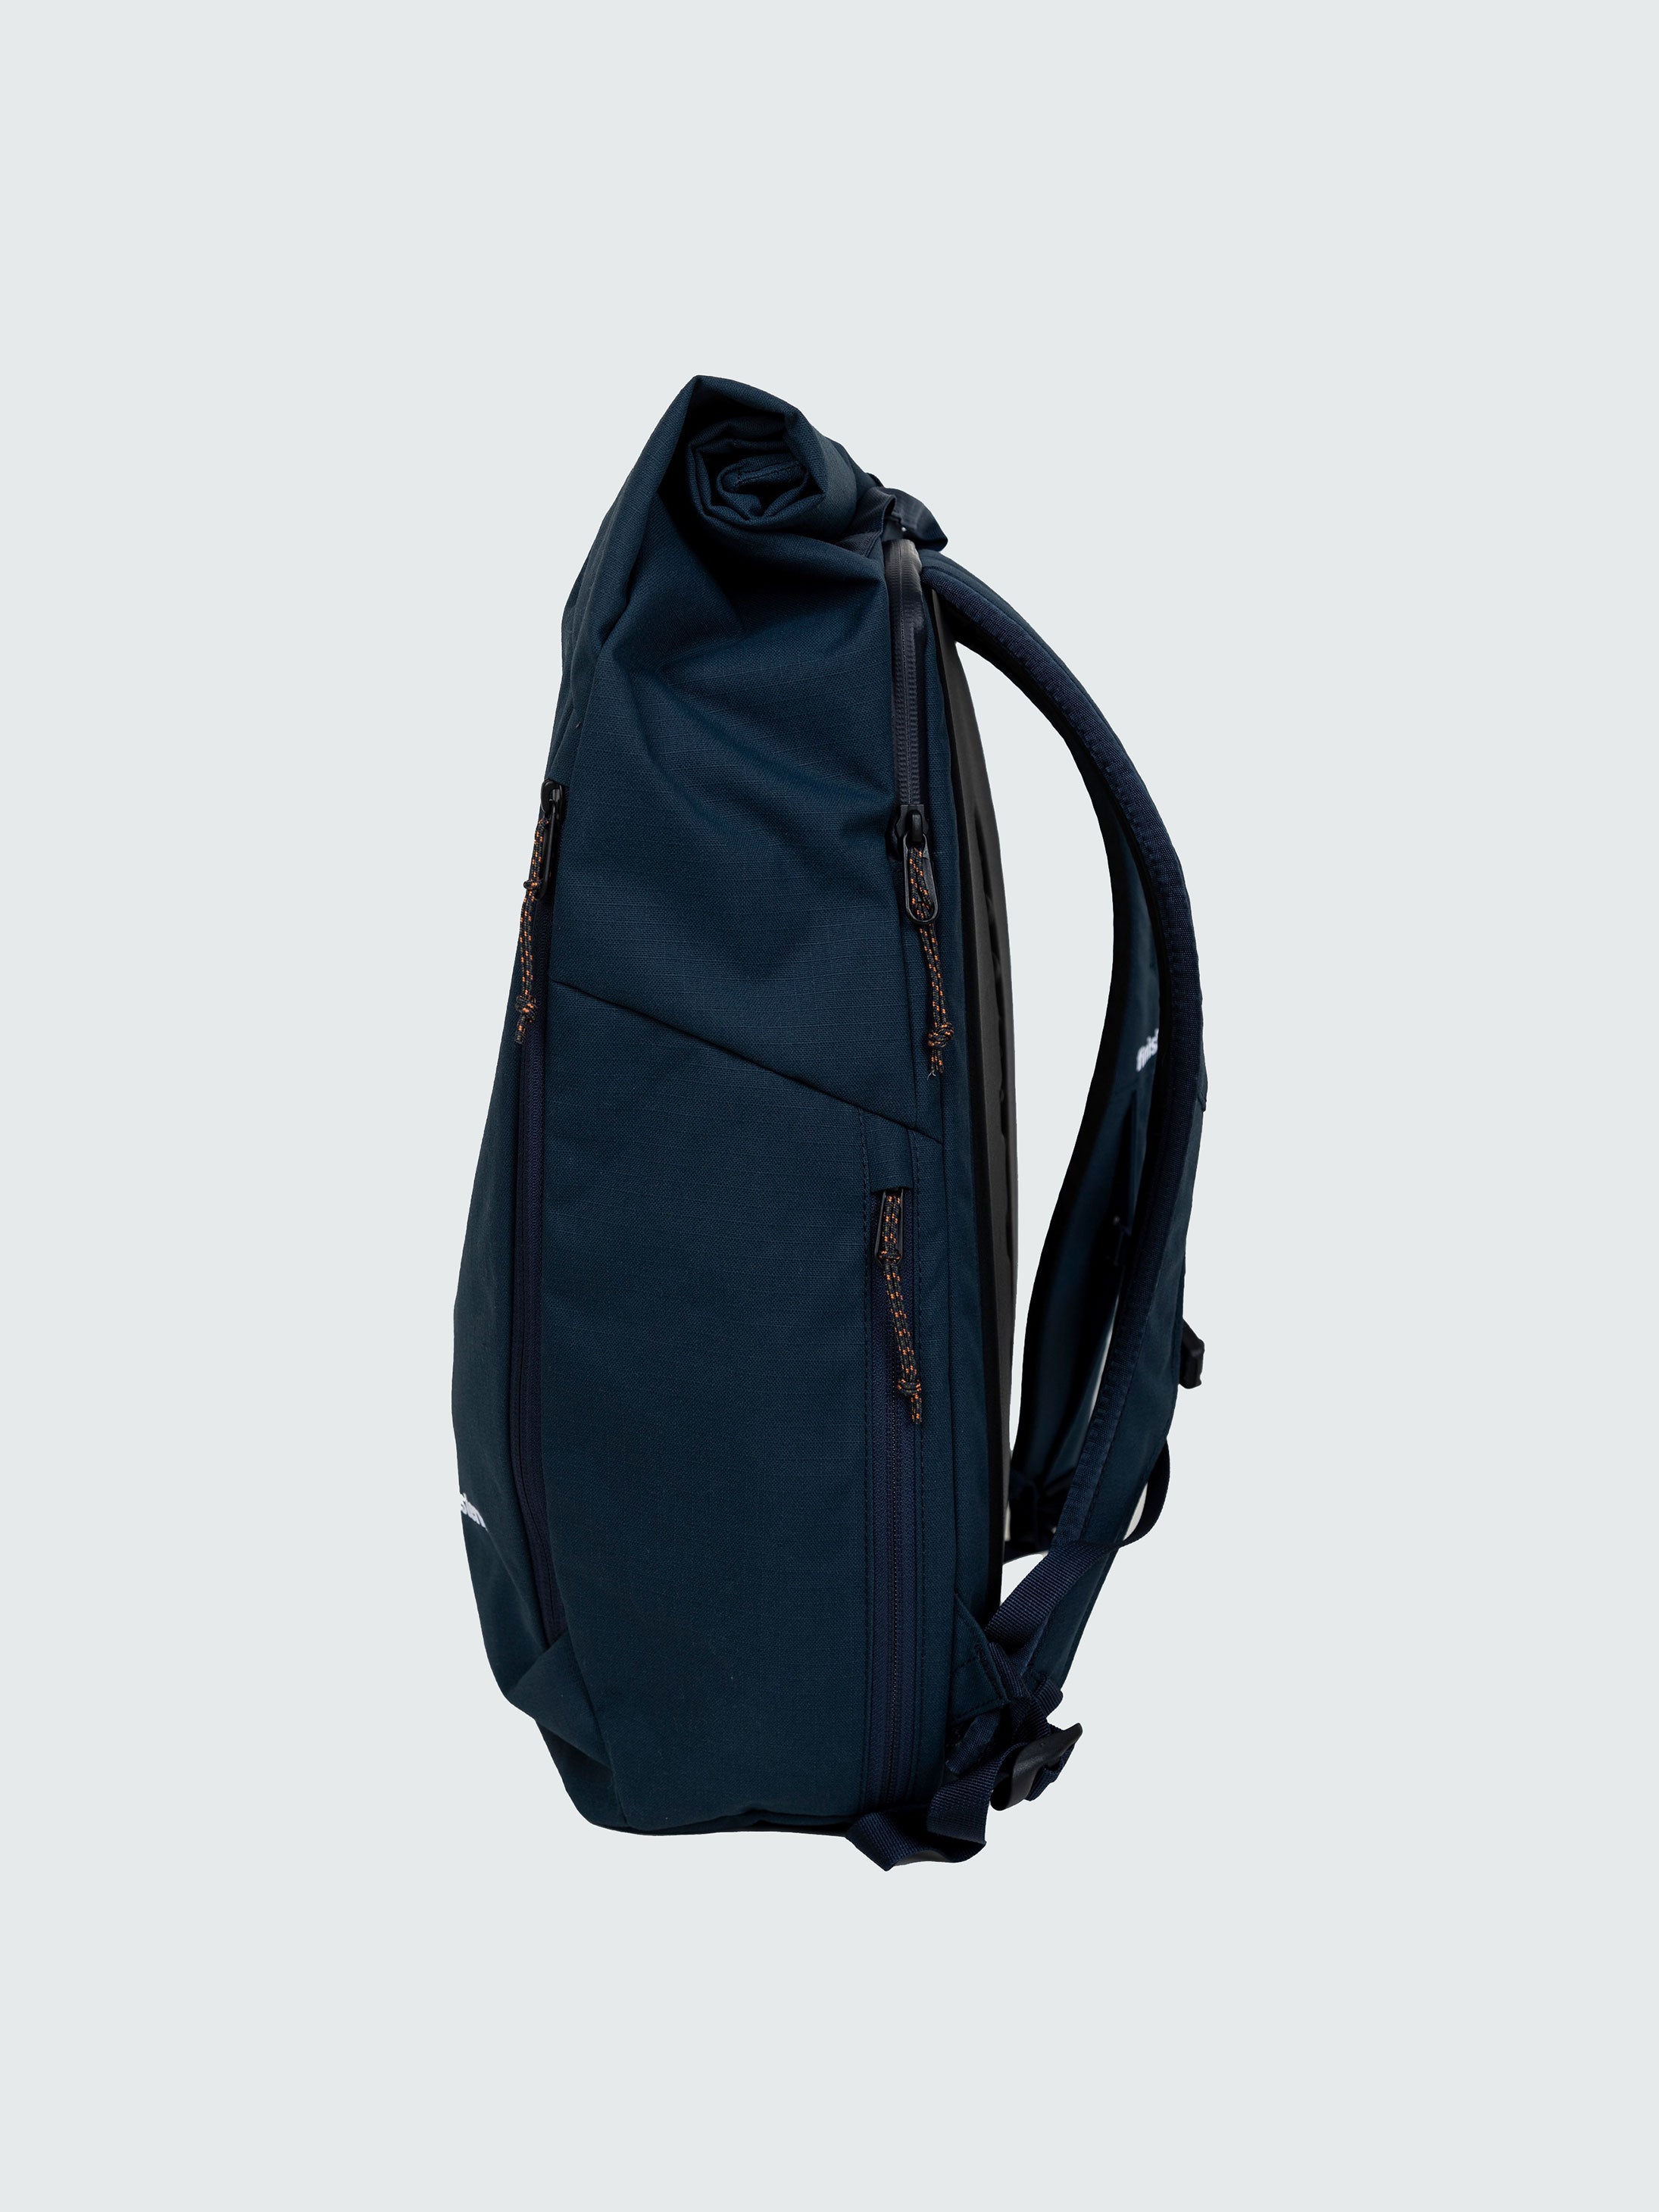 Nautilus 23L Backpack in Navy | Finisterre